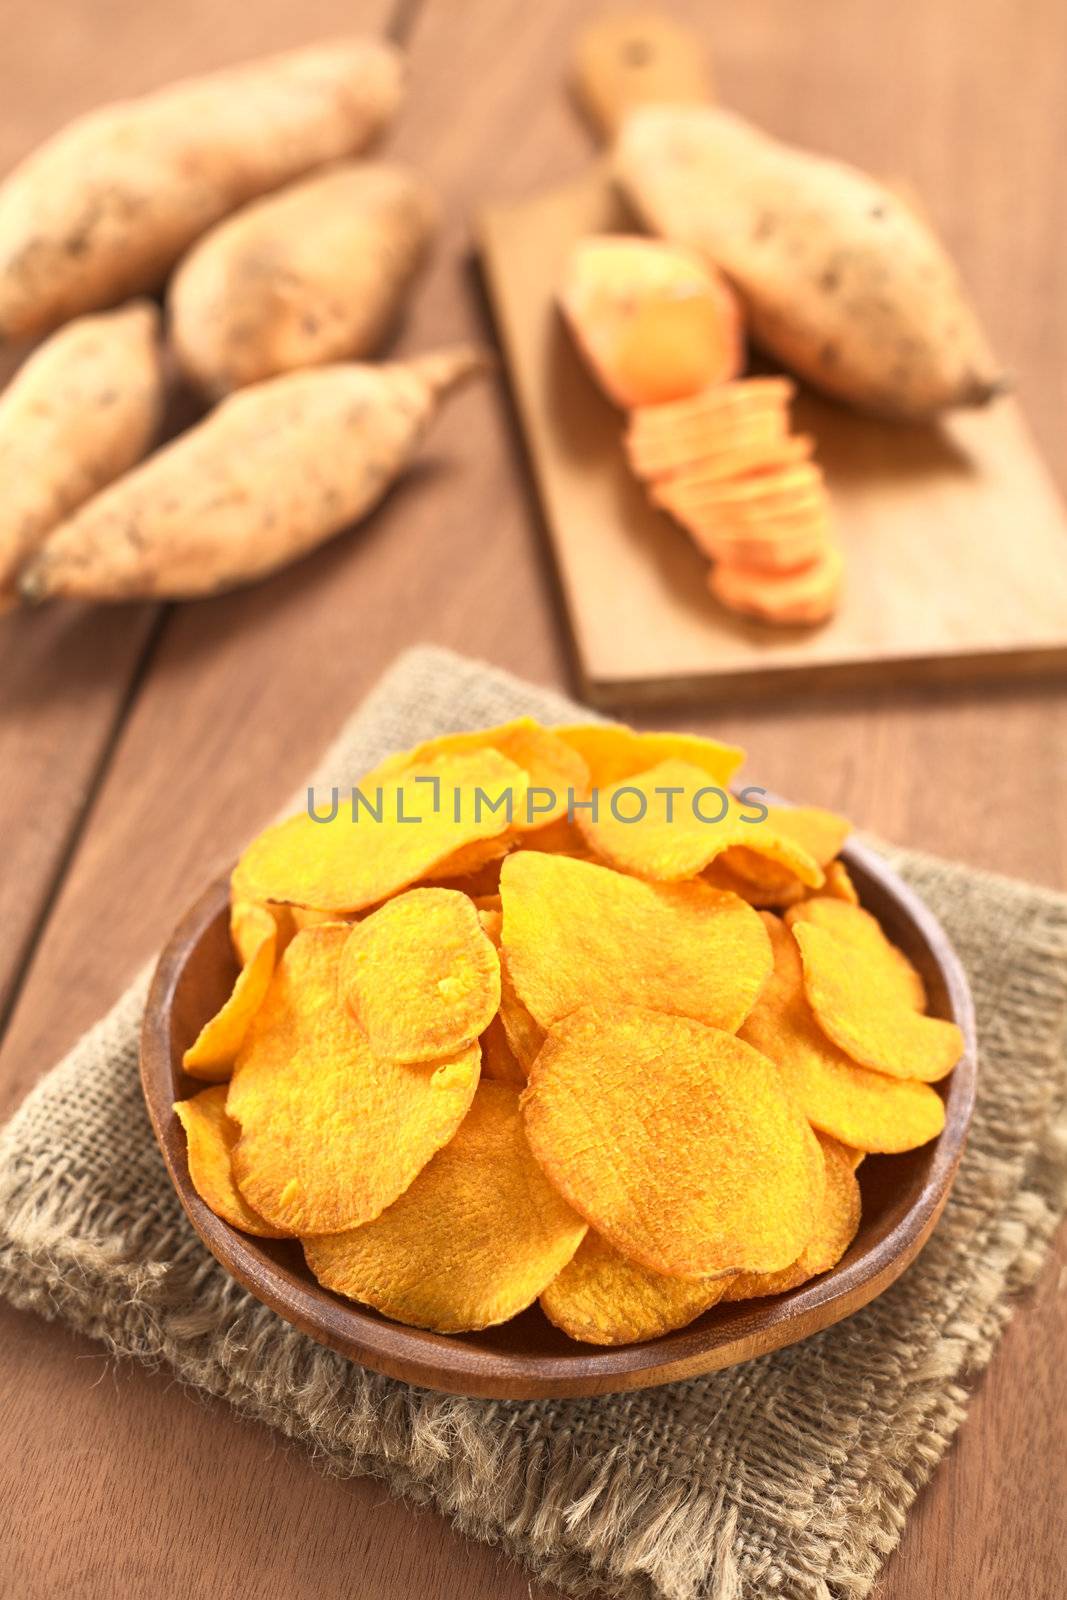 Crispy Peruvian sweet potato chips on wooden plate with sweet potatoes in the back (Selective Focus, Focus one third into the sweet potato chips)